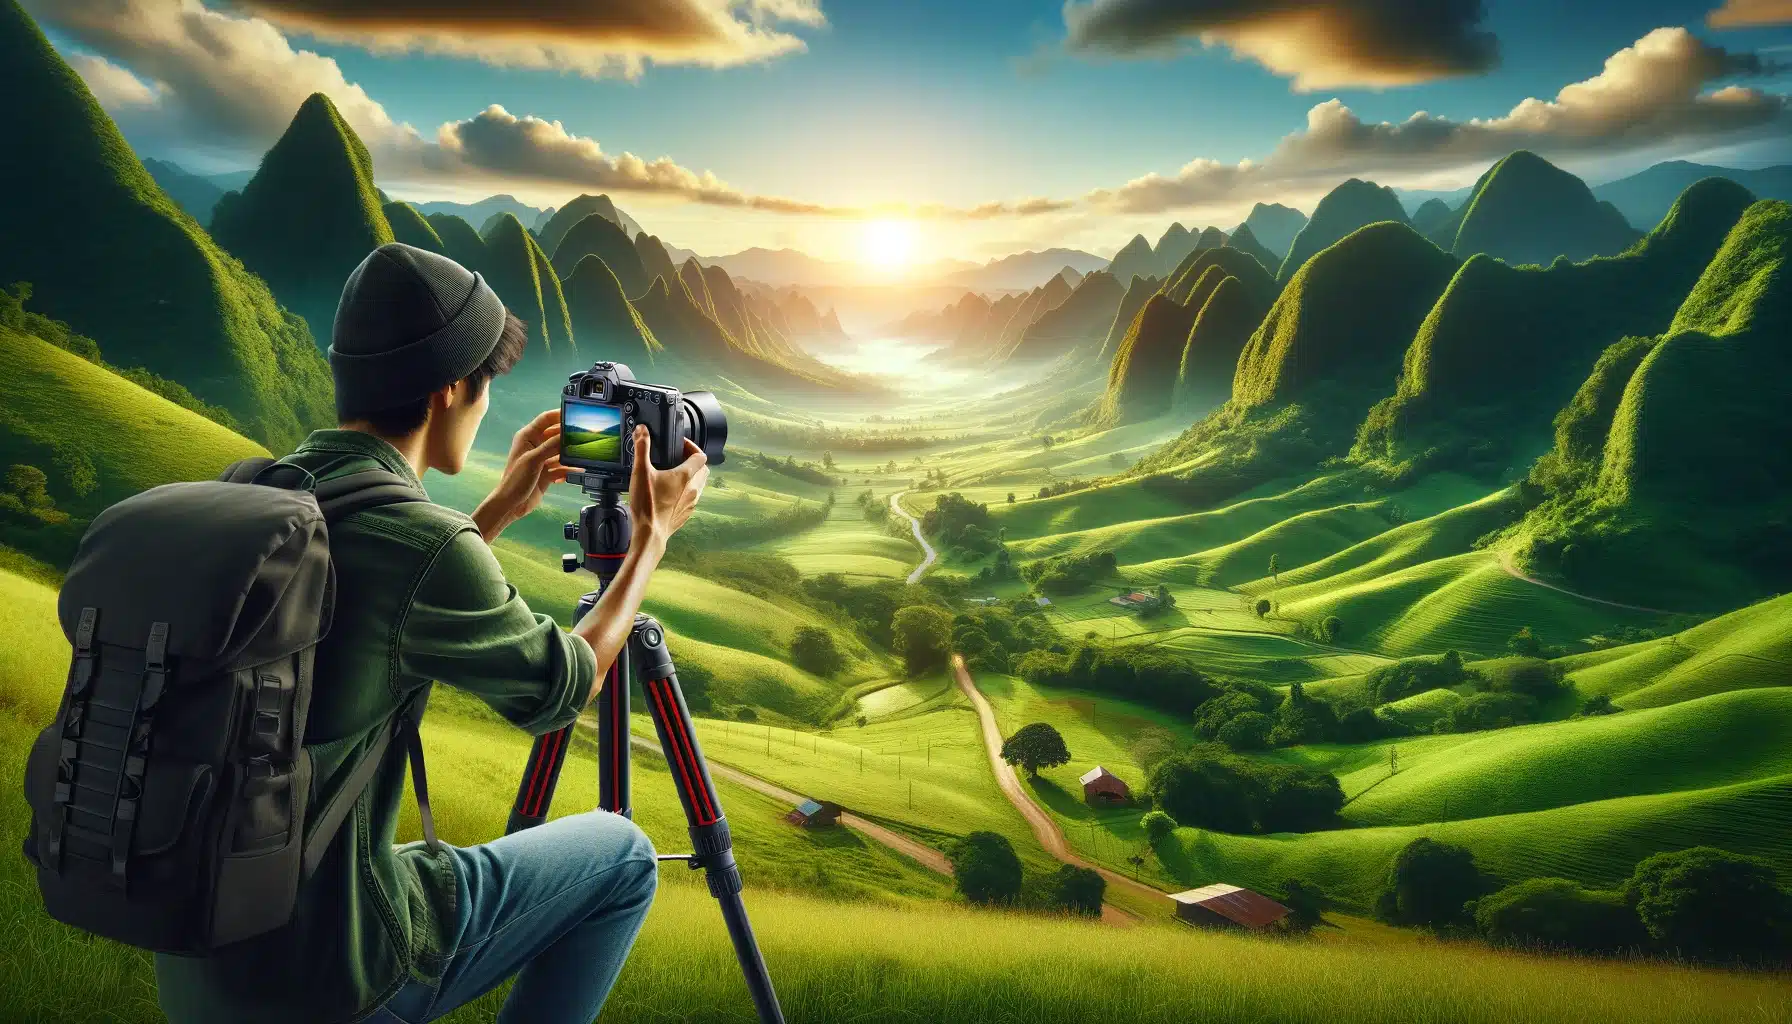 Beginner photographer adjusting a DSLR on a tripod in a lush green valley.